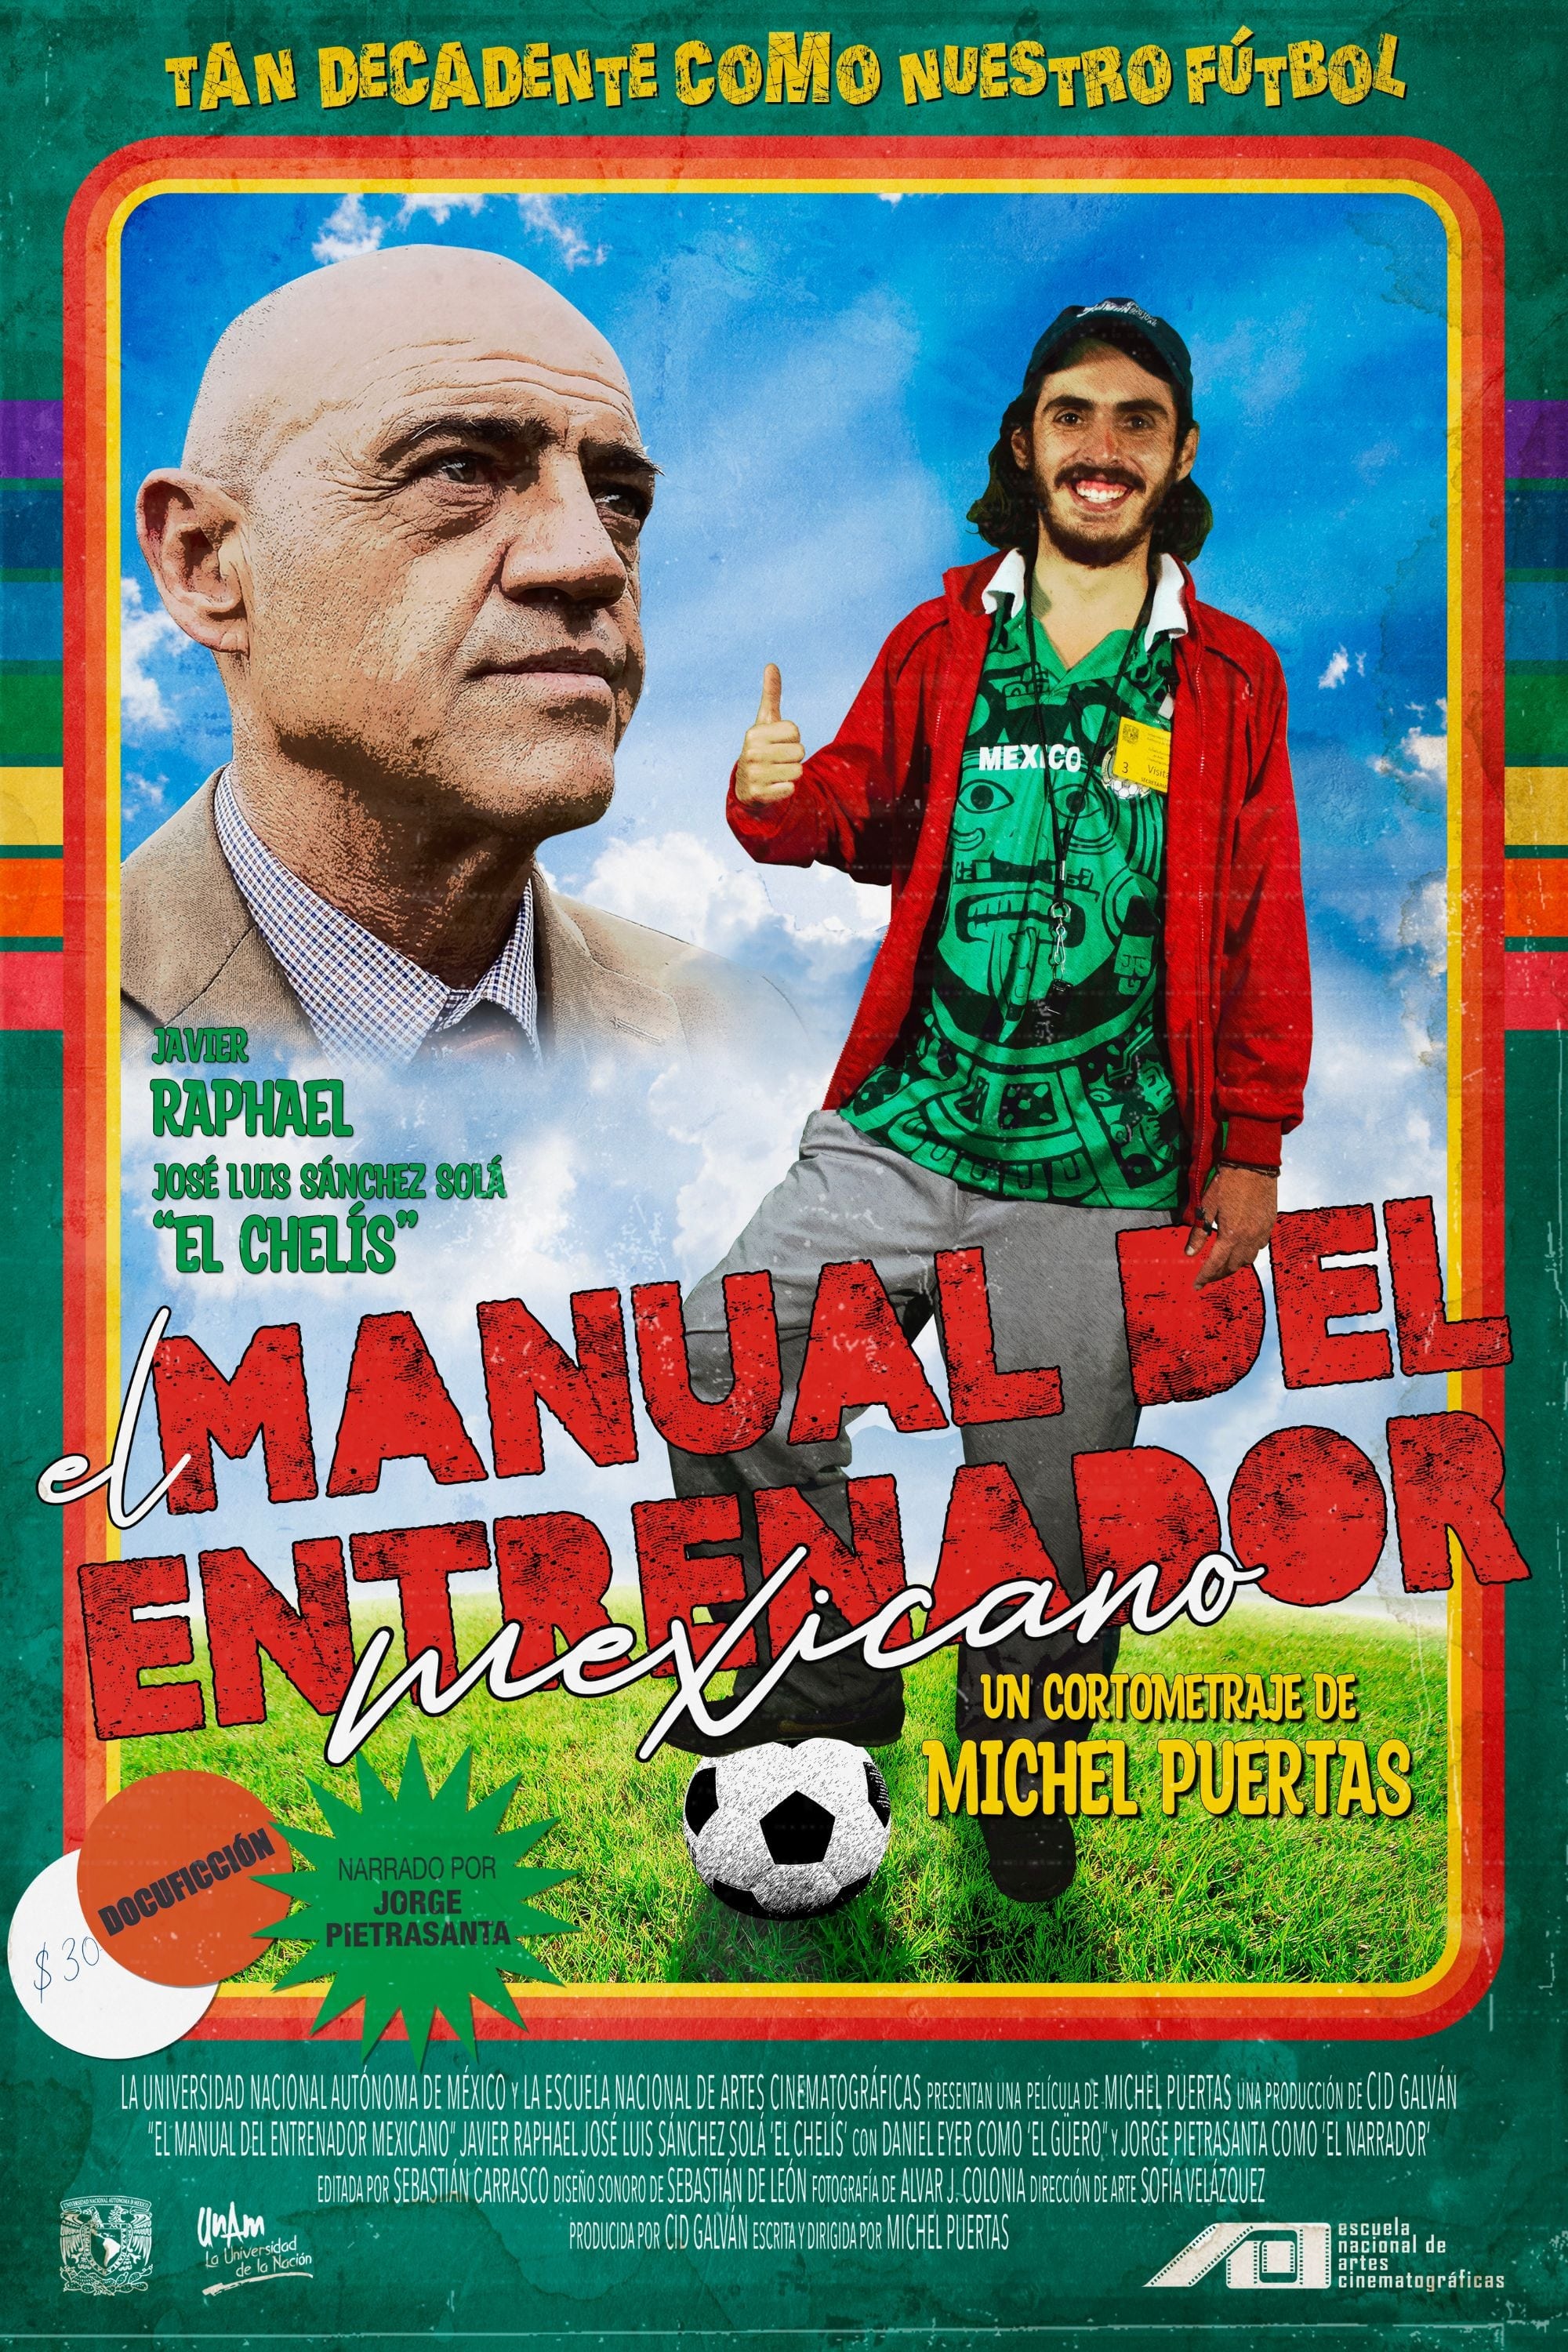 The Mexican Coach's Manual